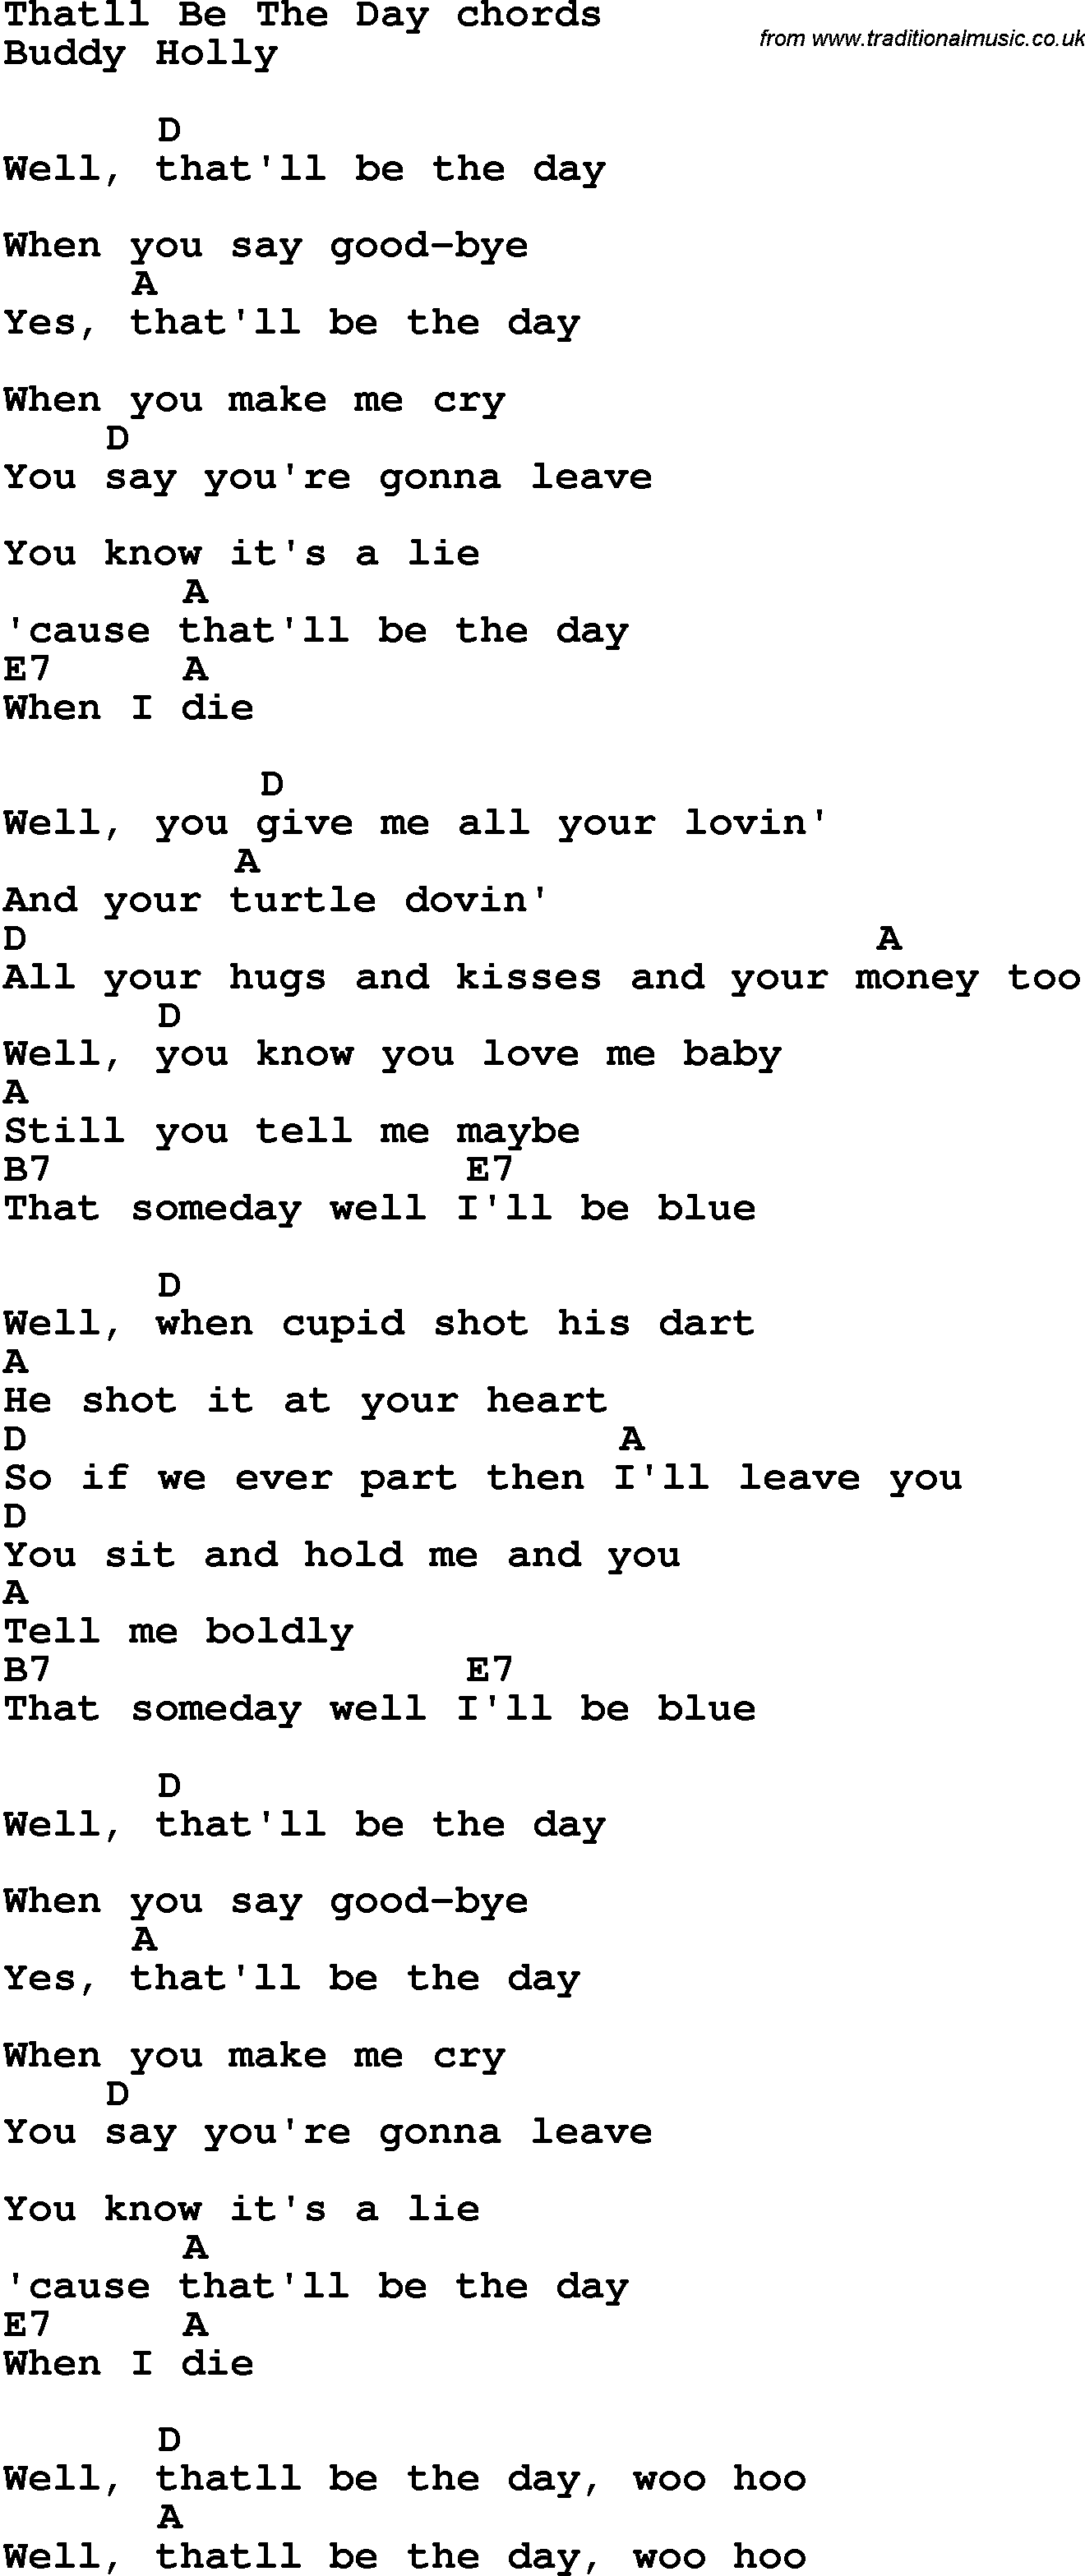 Song Lyrics with guitar chords for That'll Be The Day - Buddy Holly